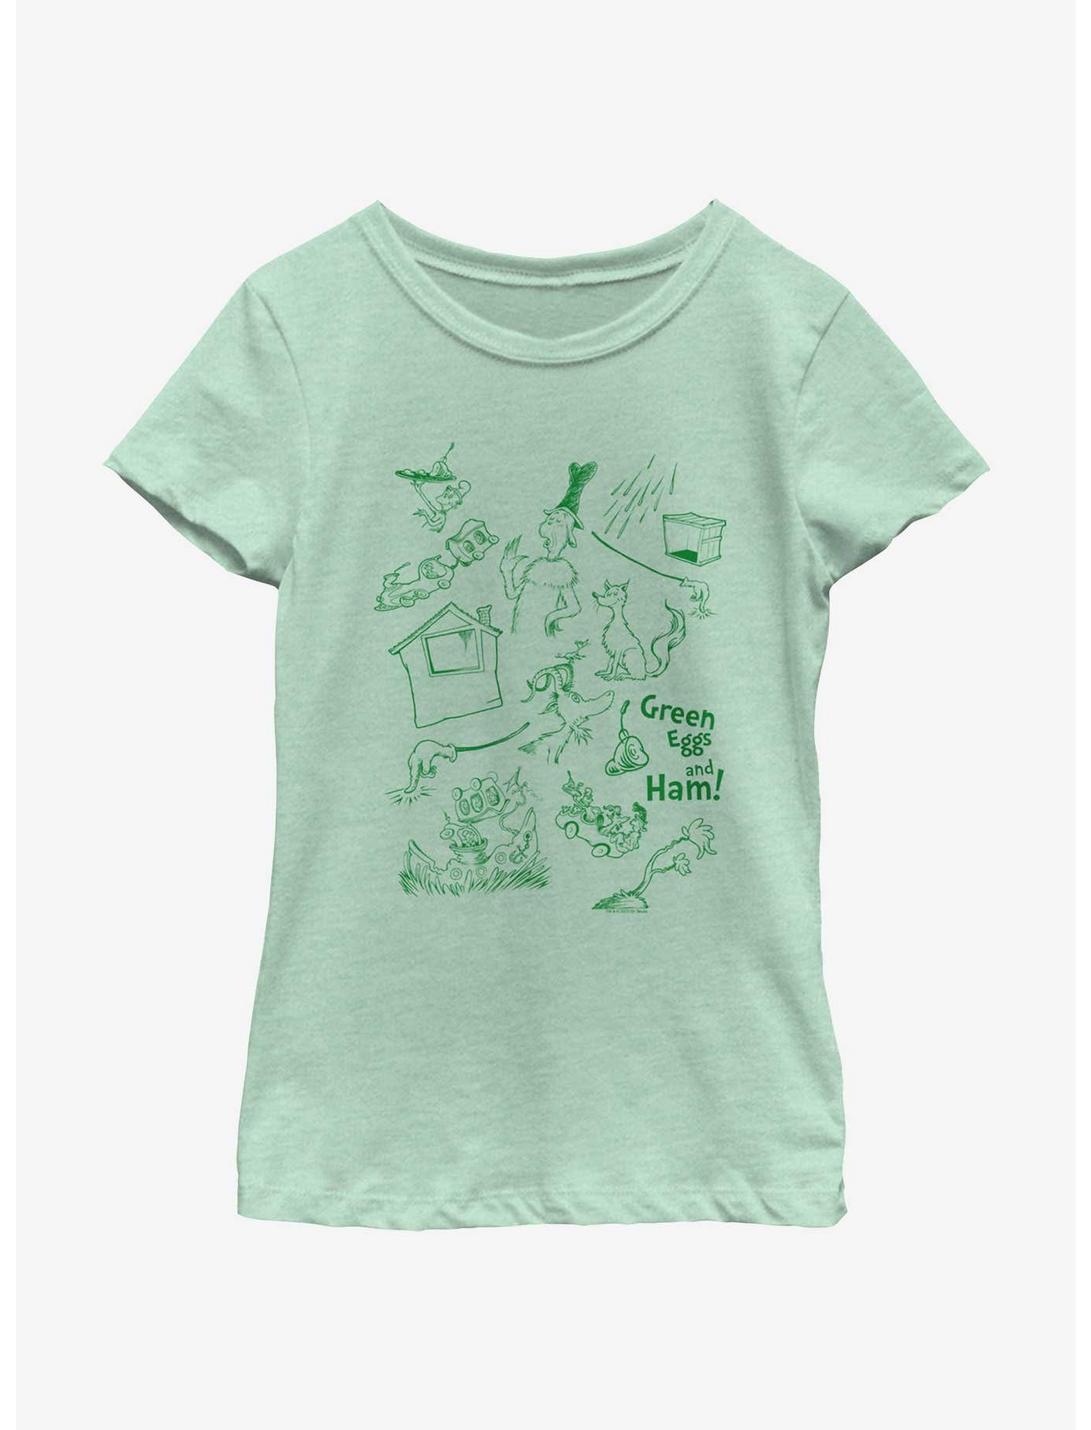 Dr. Seuss Green Eggs And Ham Icons Youth Girls T-Shirt, MINT, hi-res